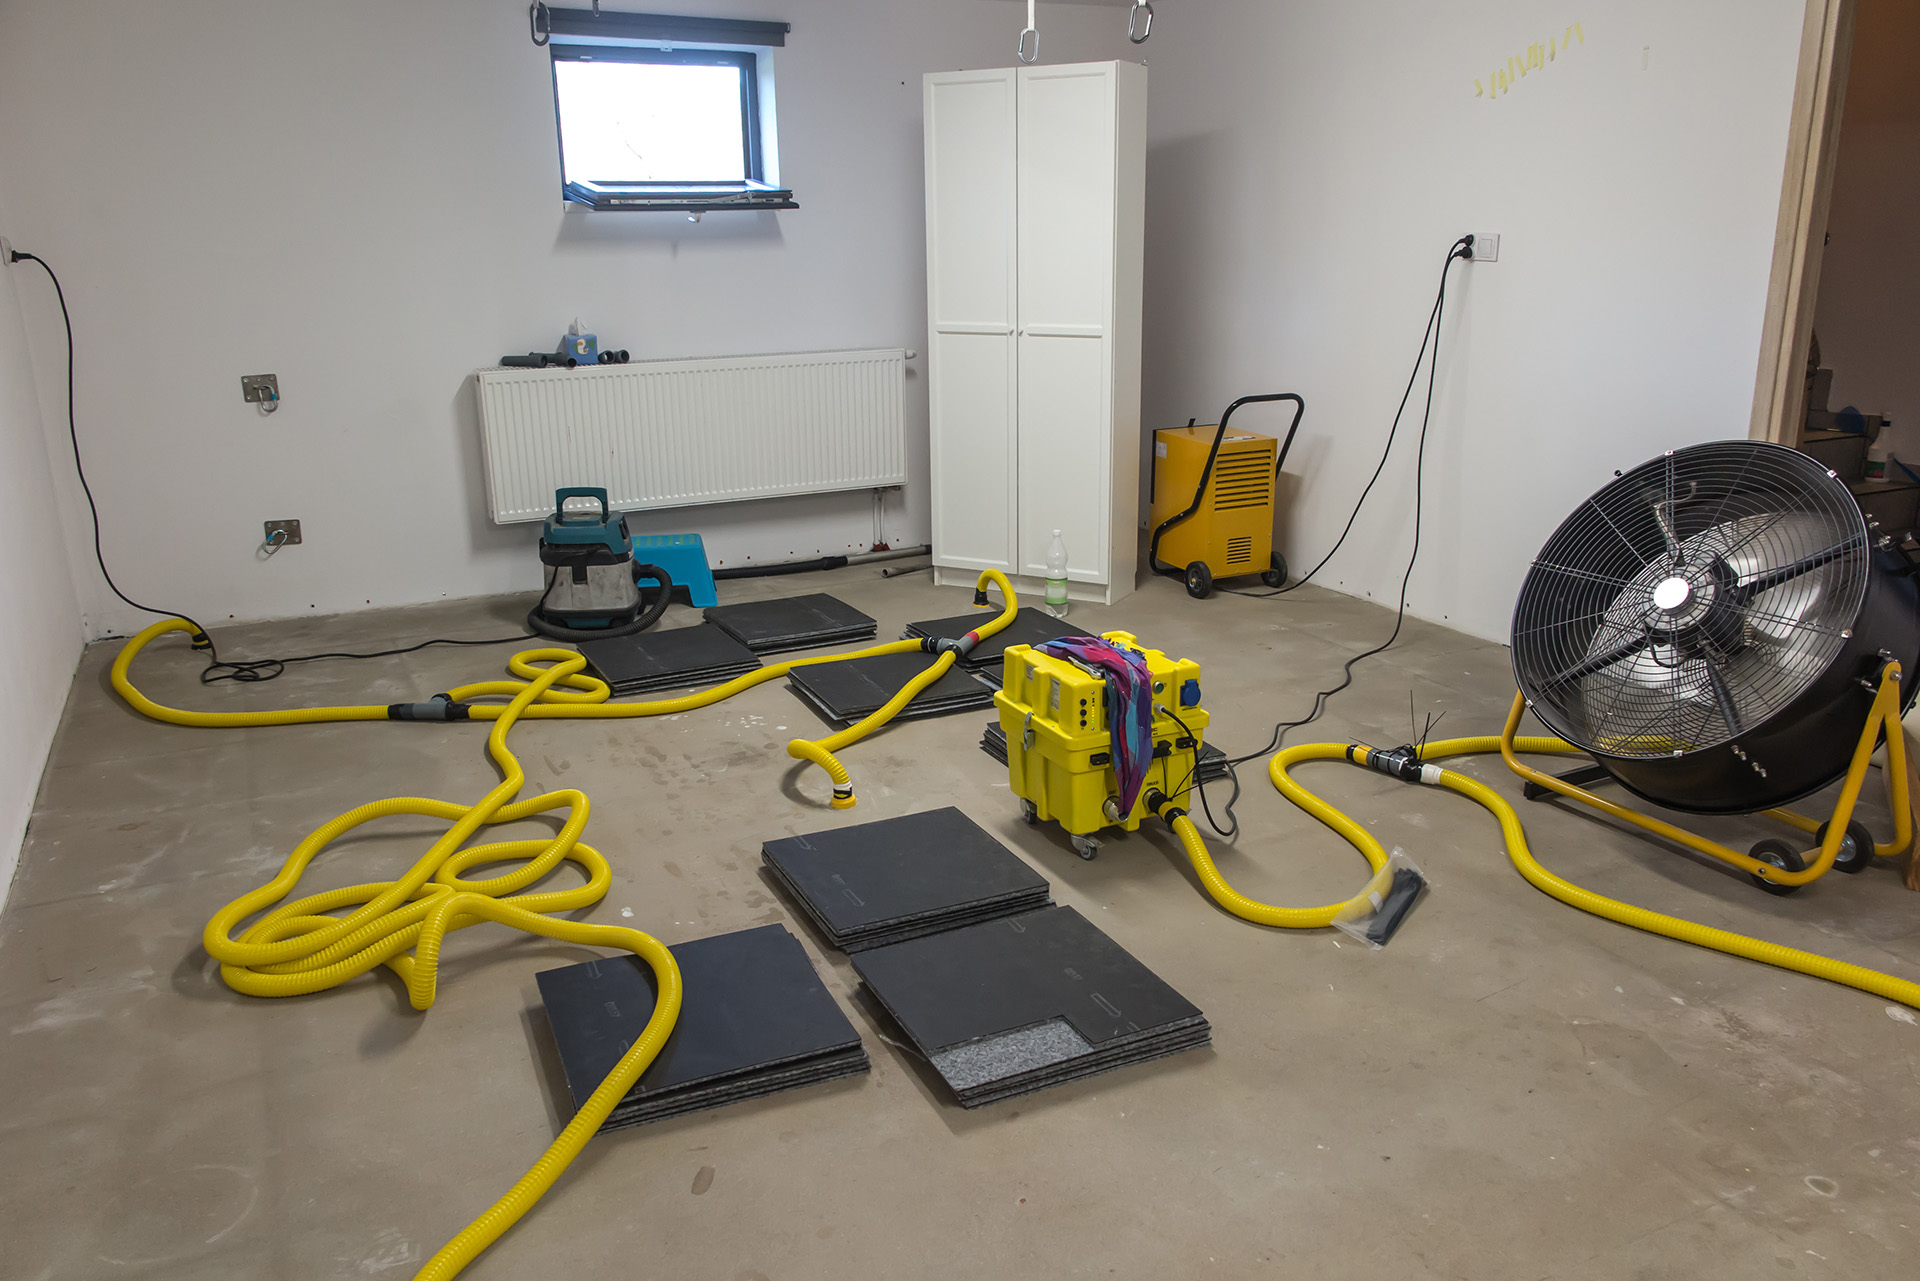 Don't Panic! What to Do When Your Basement Floods